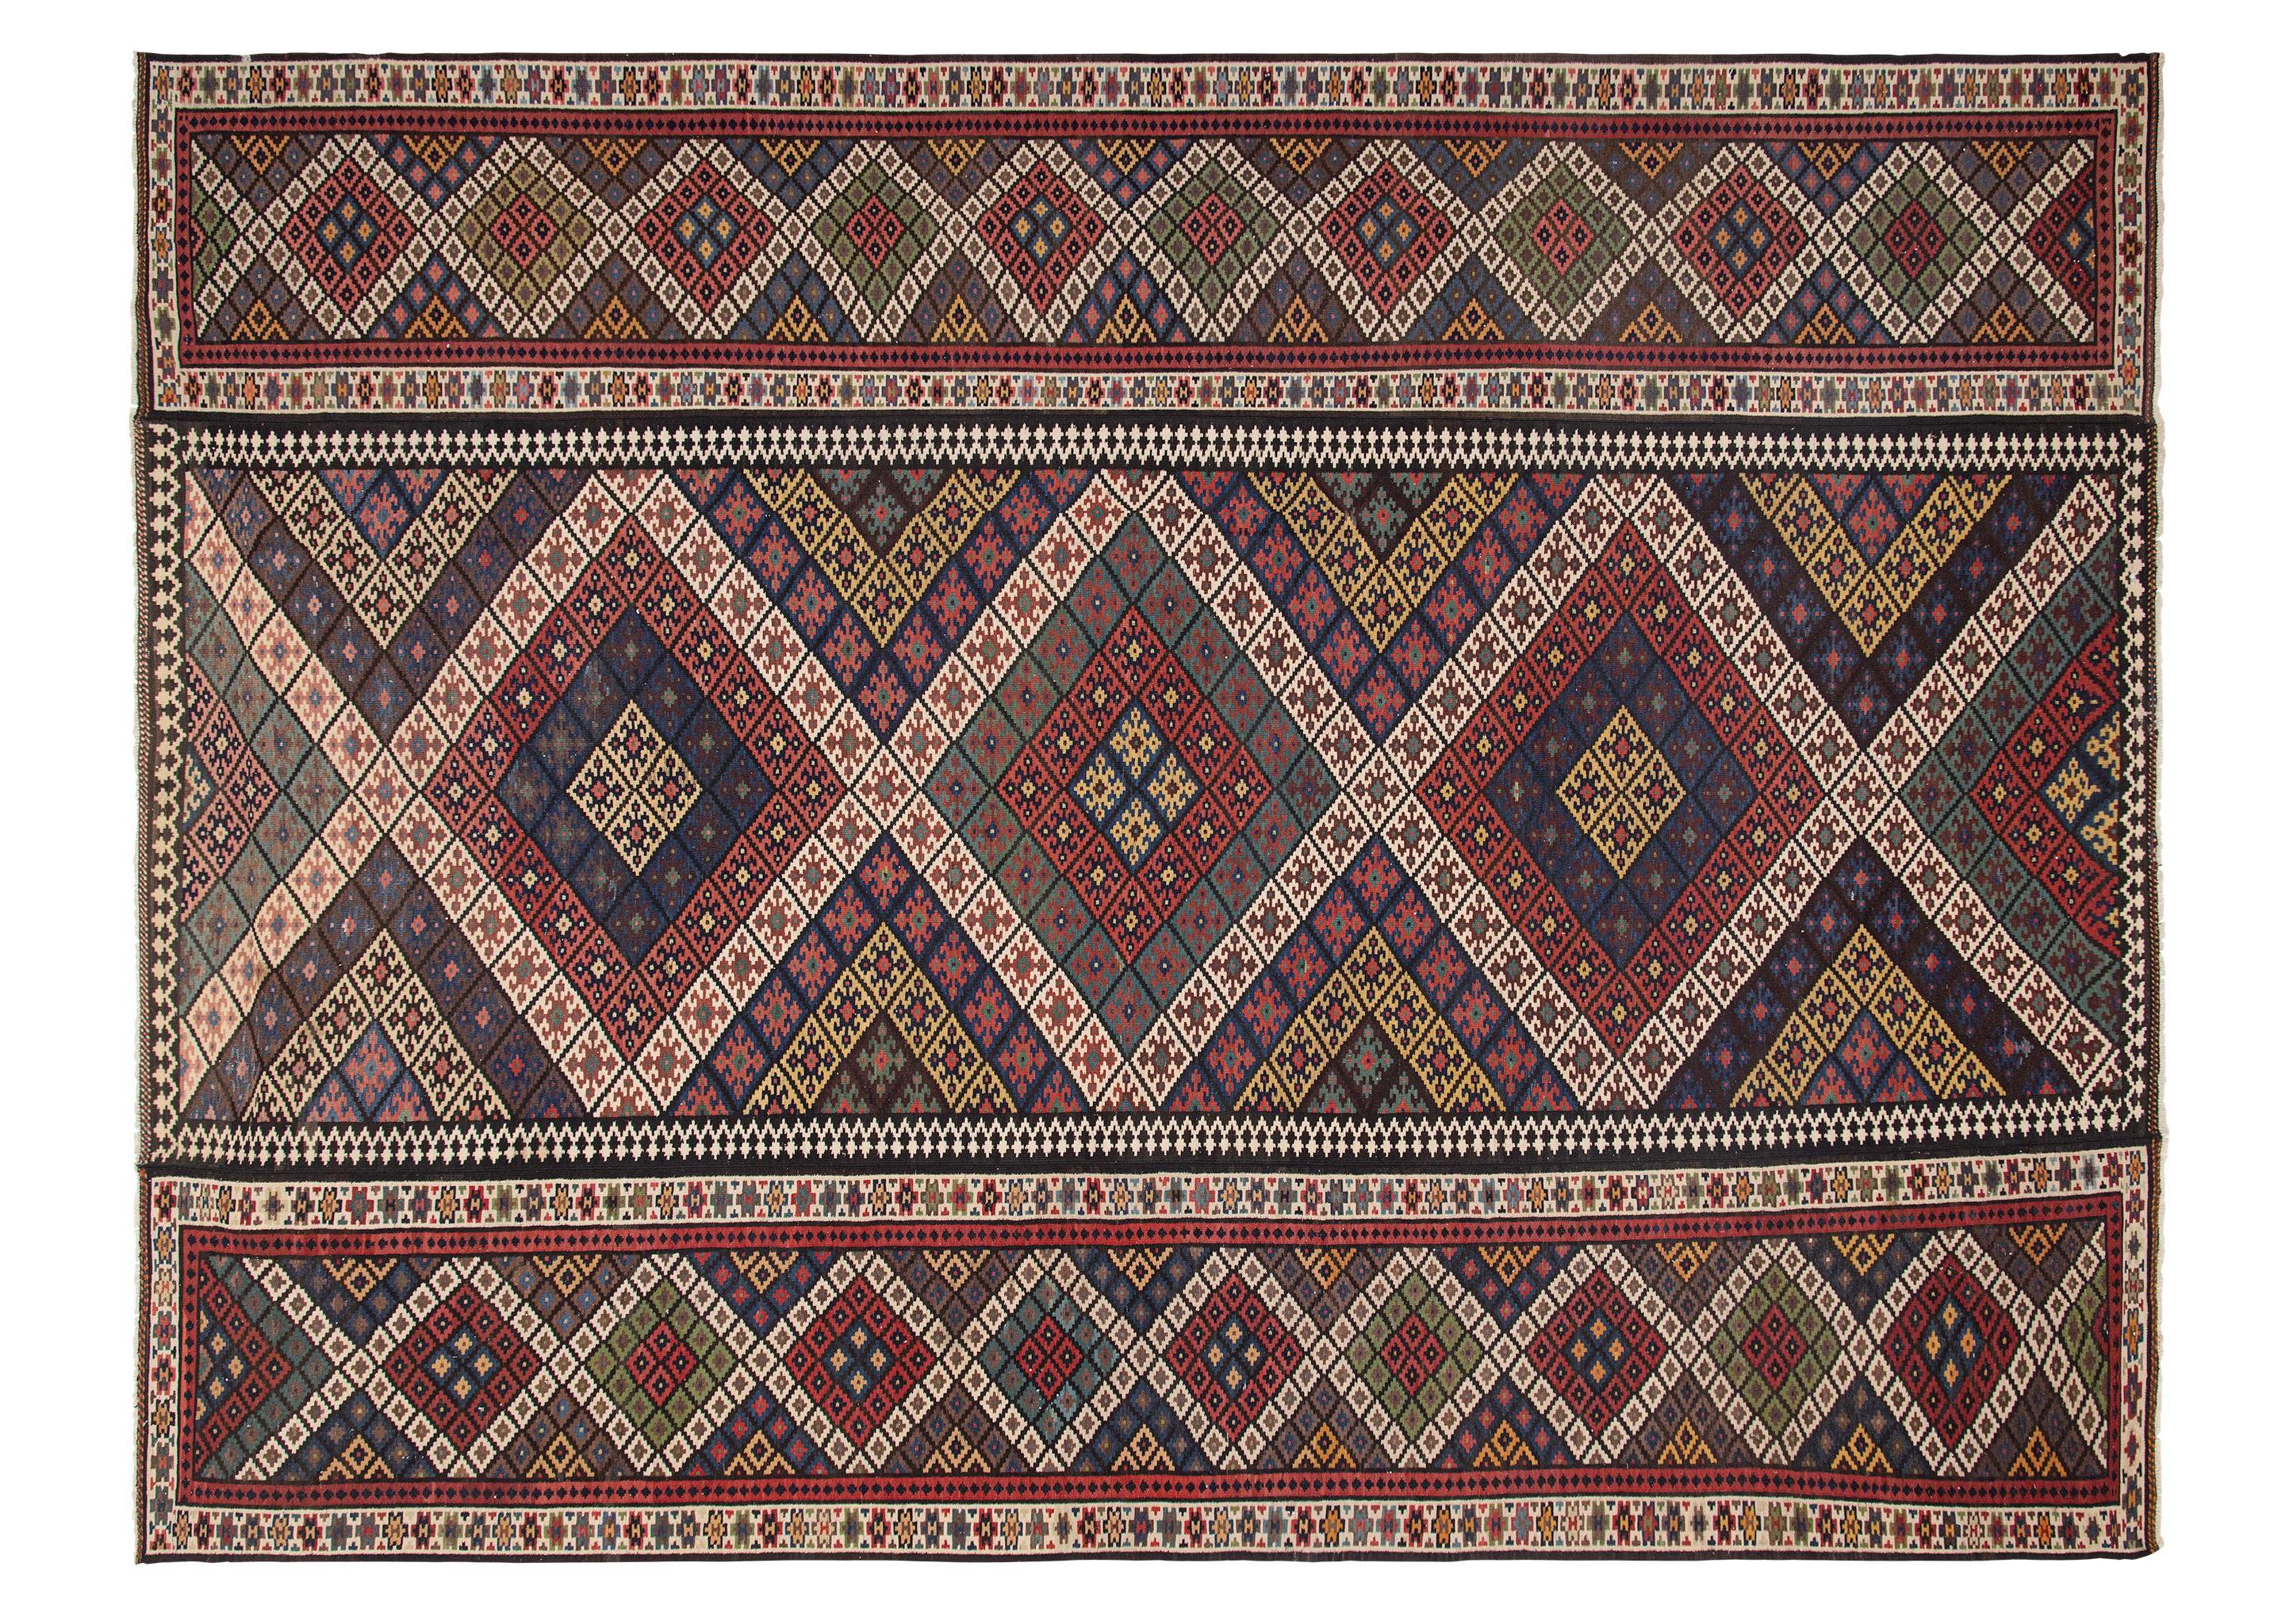 This is a vintage Kilim rug c. 1900. This rug is magnificent considering the complicity of pattern, color, and sheer size (12'9x17'3). The rug is primarily divided into three sections: one center pattern and two similar sections on either side. The